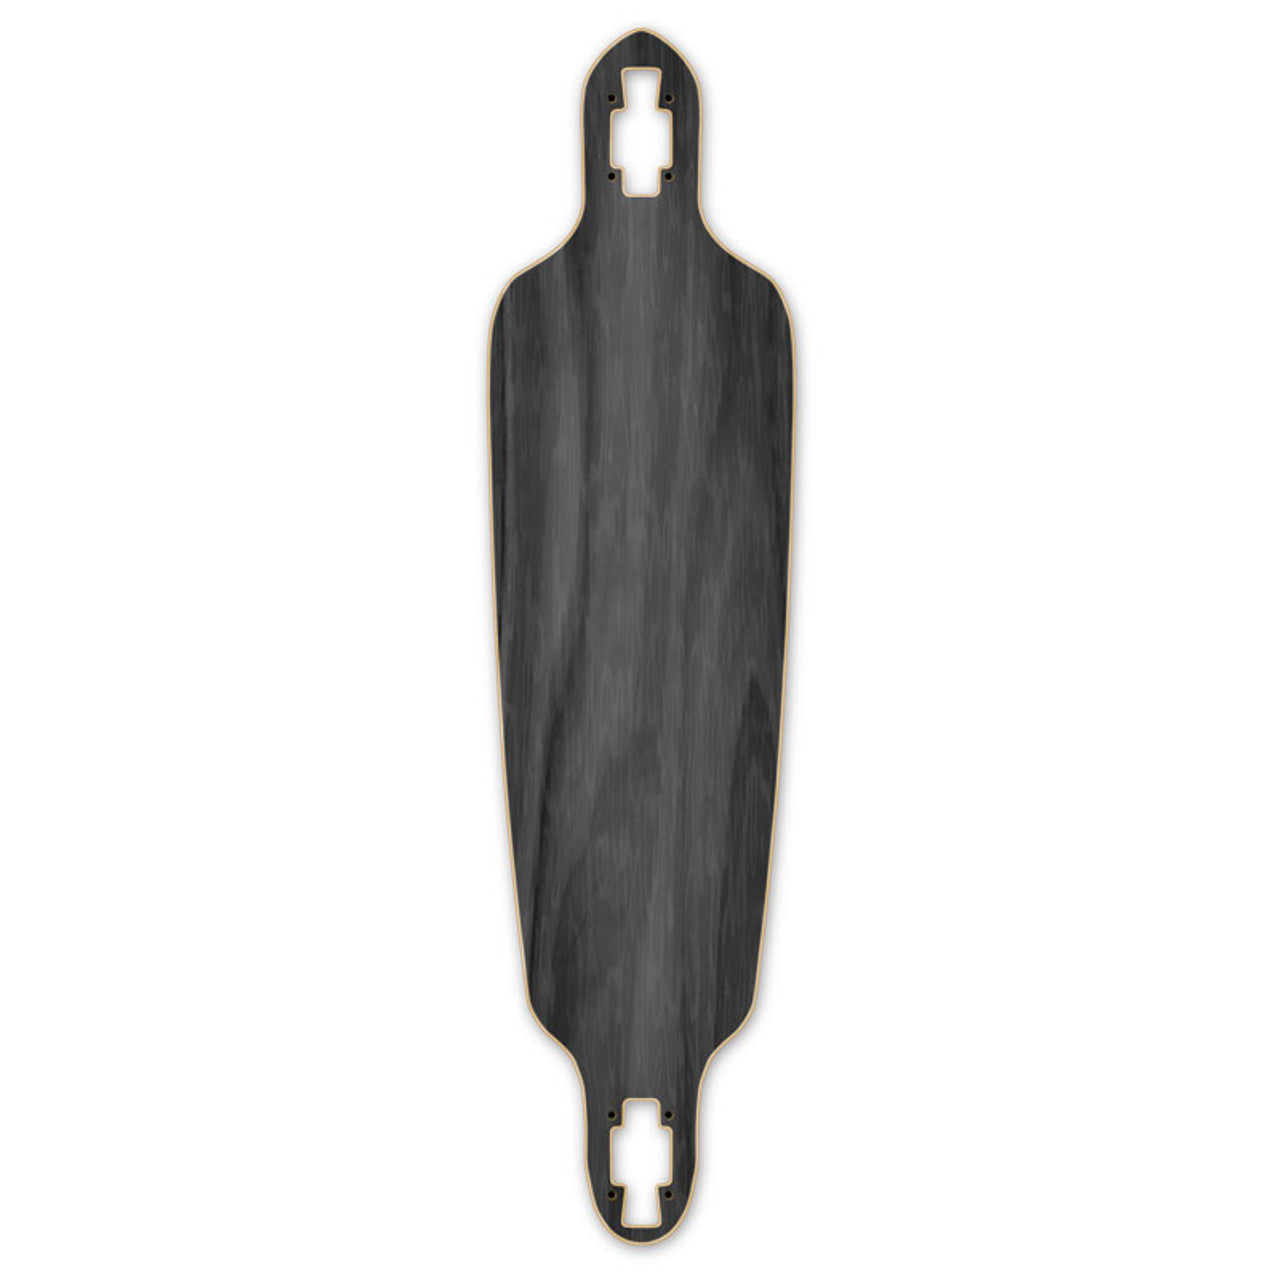 Yocaher Drop Through Longboard Deck - Stained Black